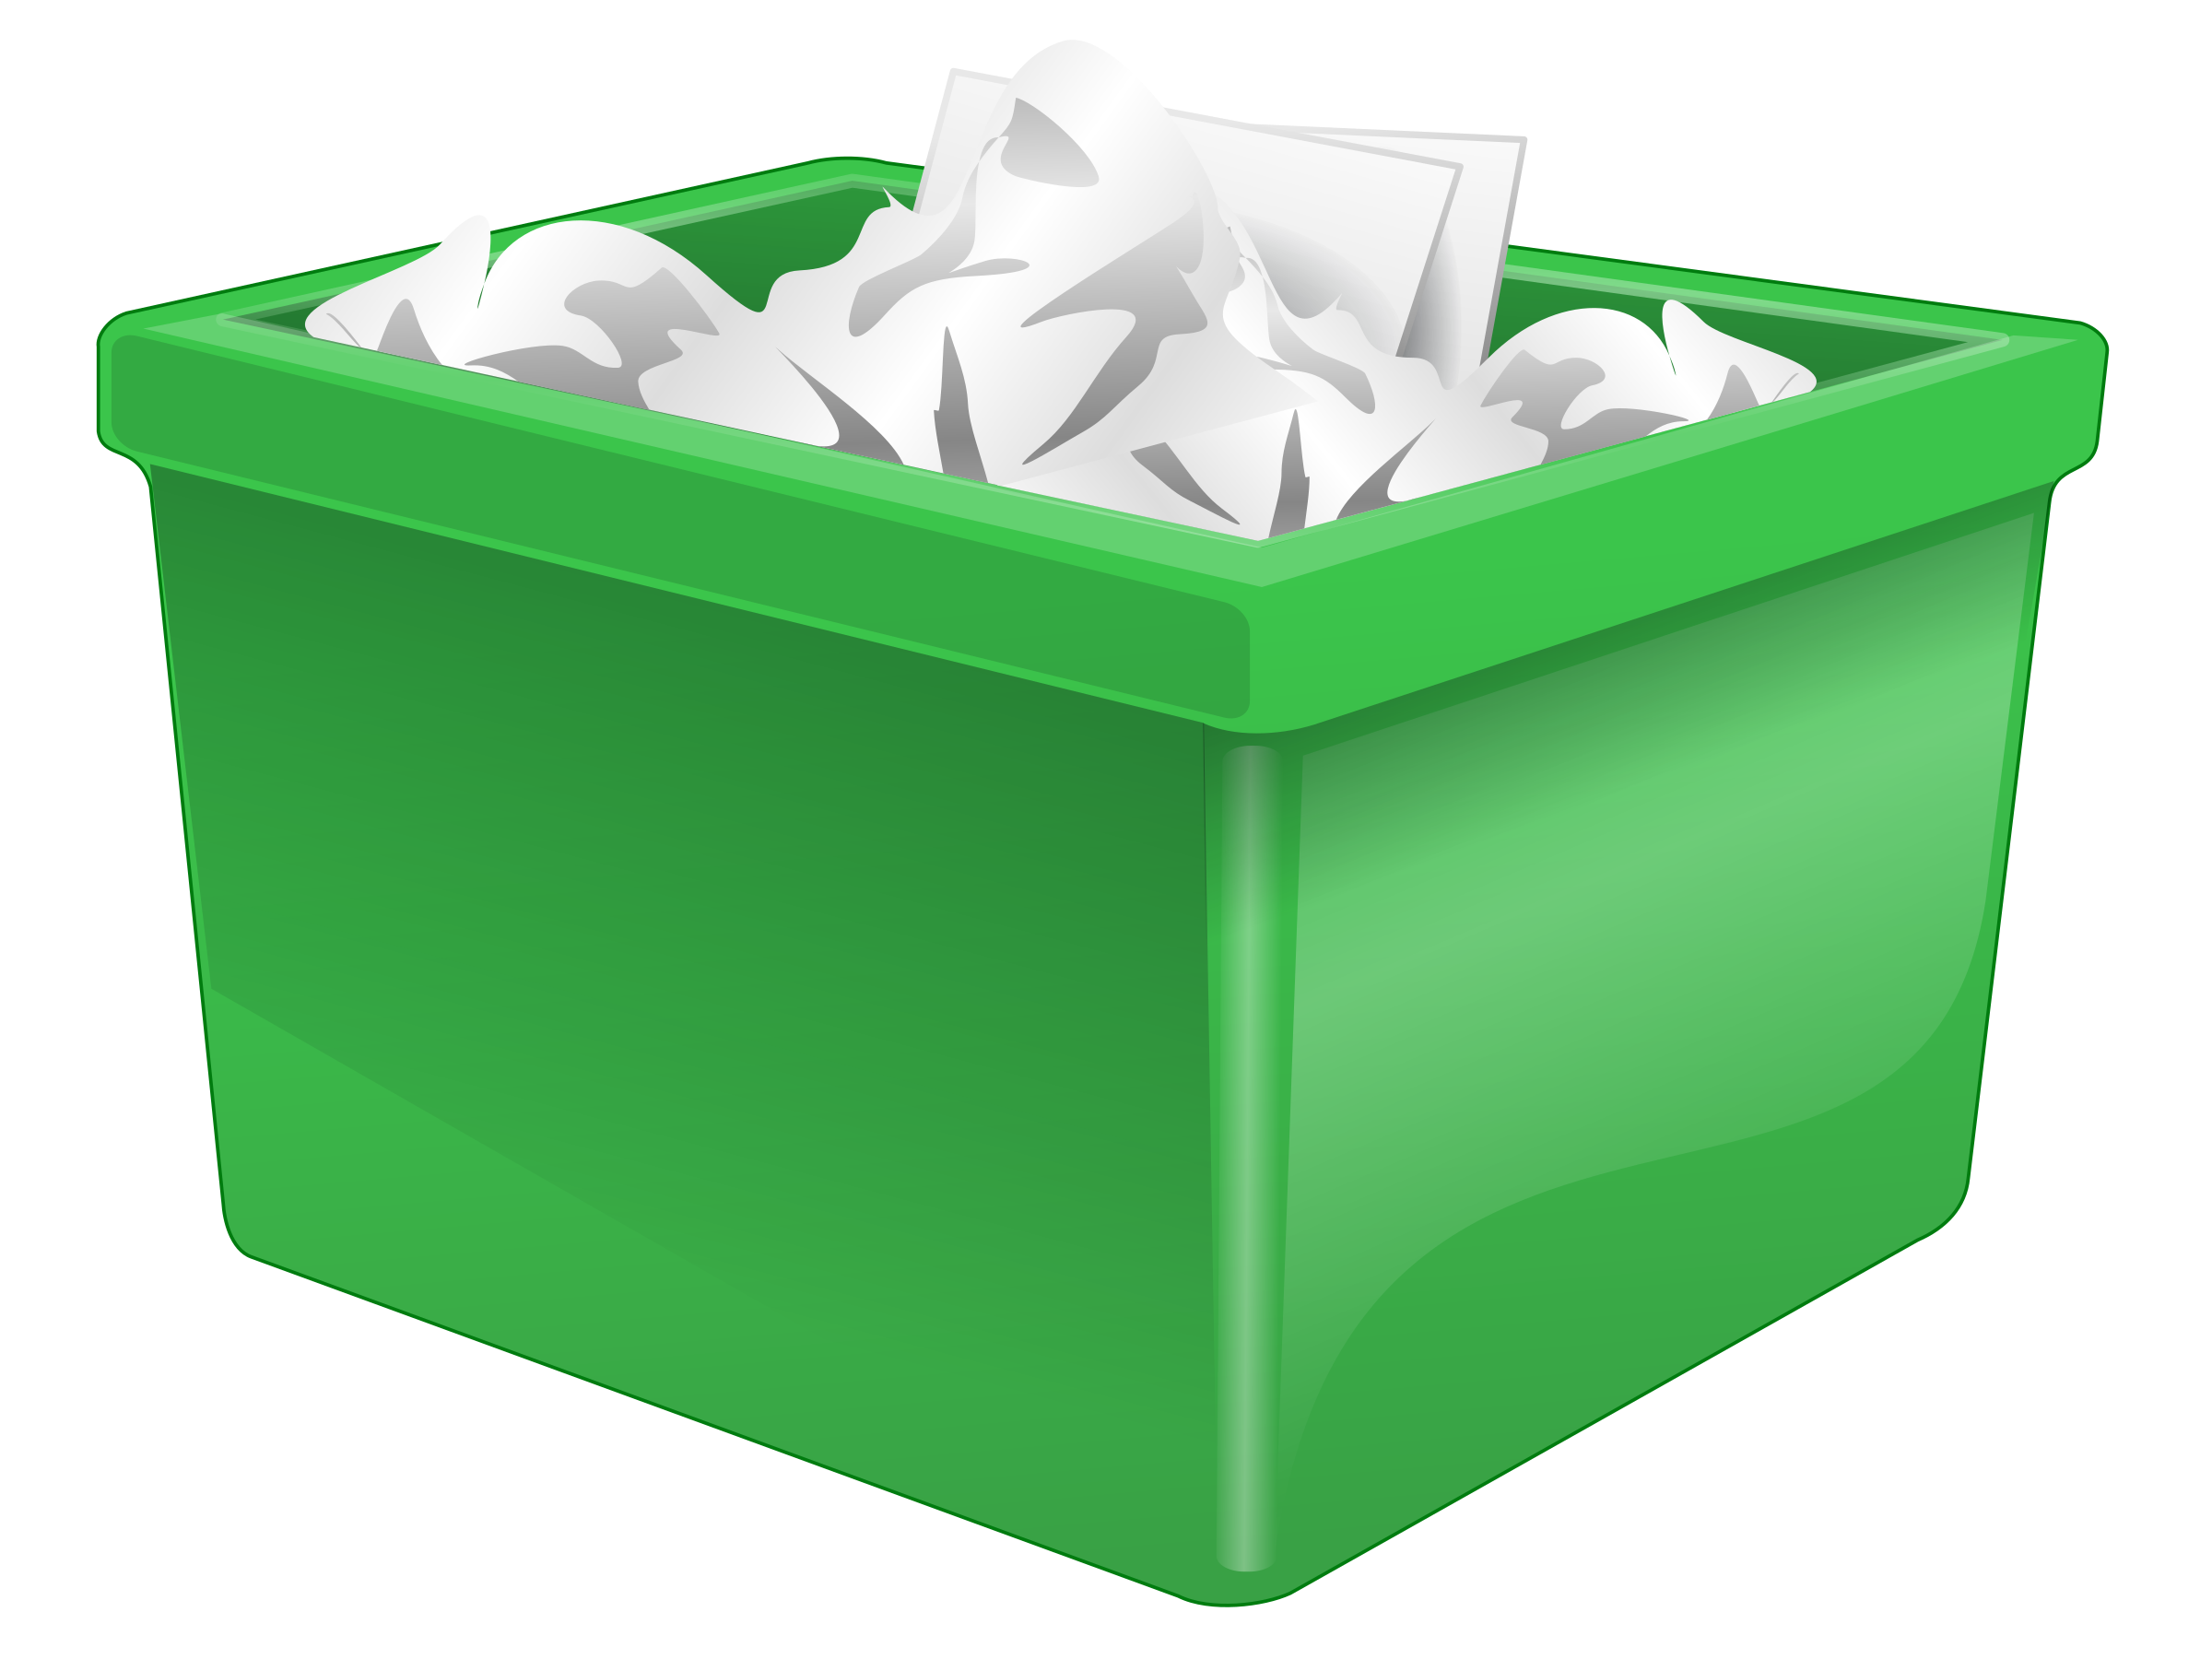 Paper clipart recycle bin. Green plastic box filled